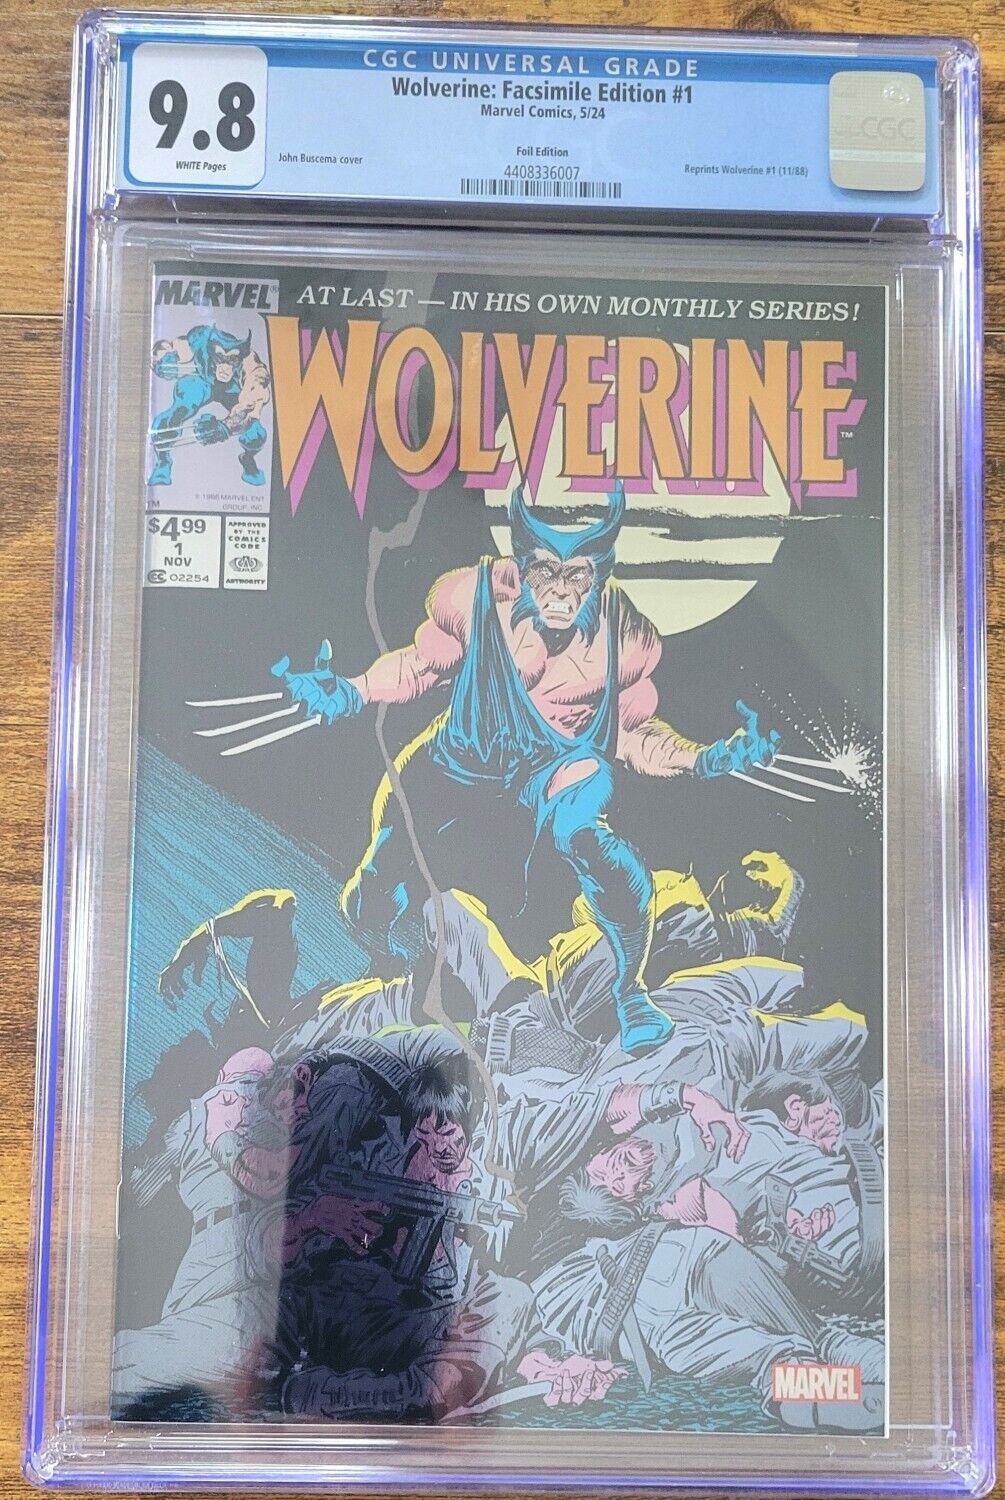 WOLVERINE BY CLAREMONT & BUSCEMA #1 FACSIMILE EDITION CGC GRADED 9.8